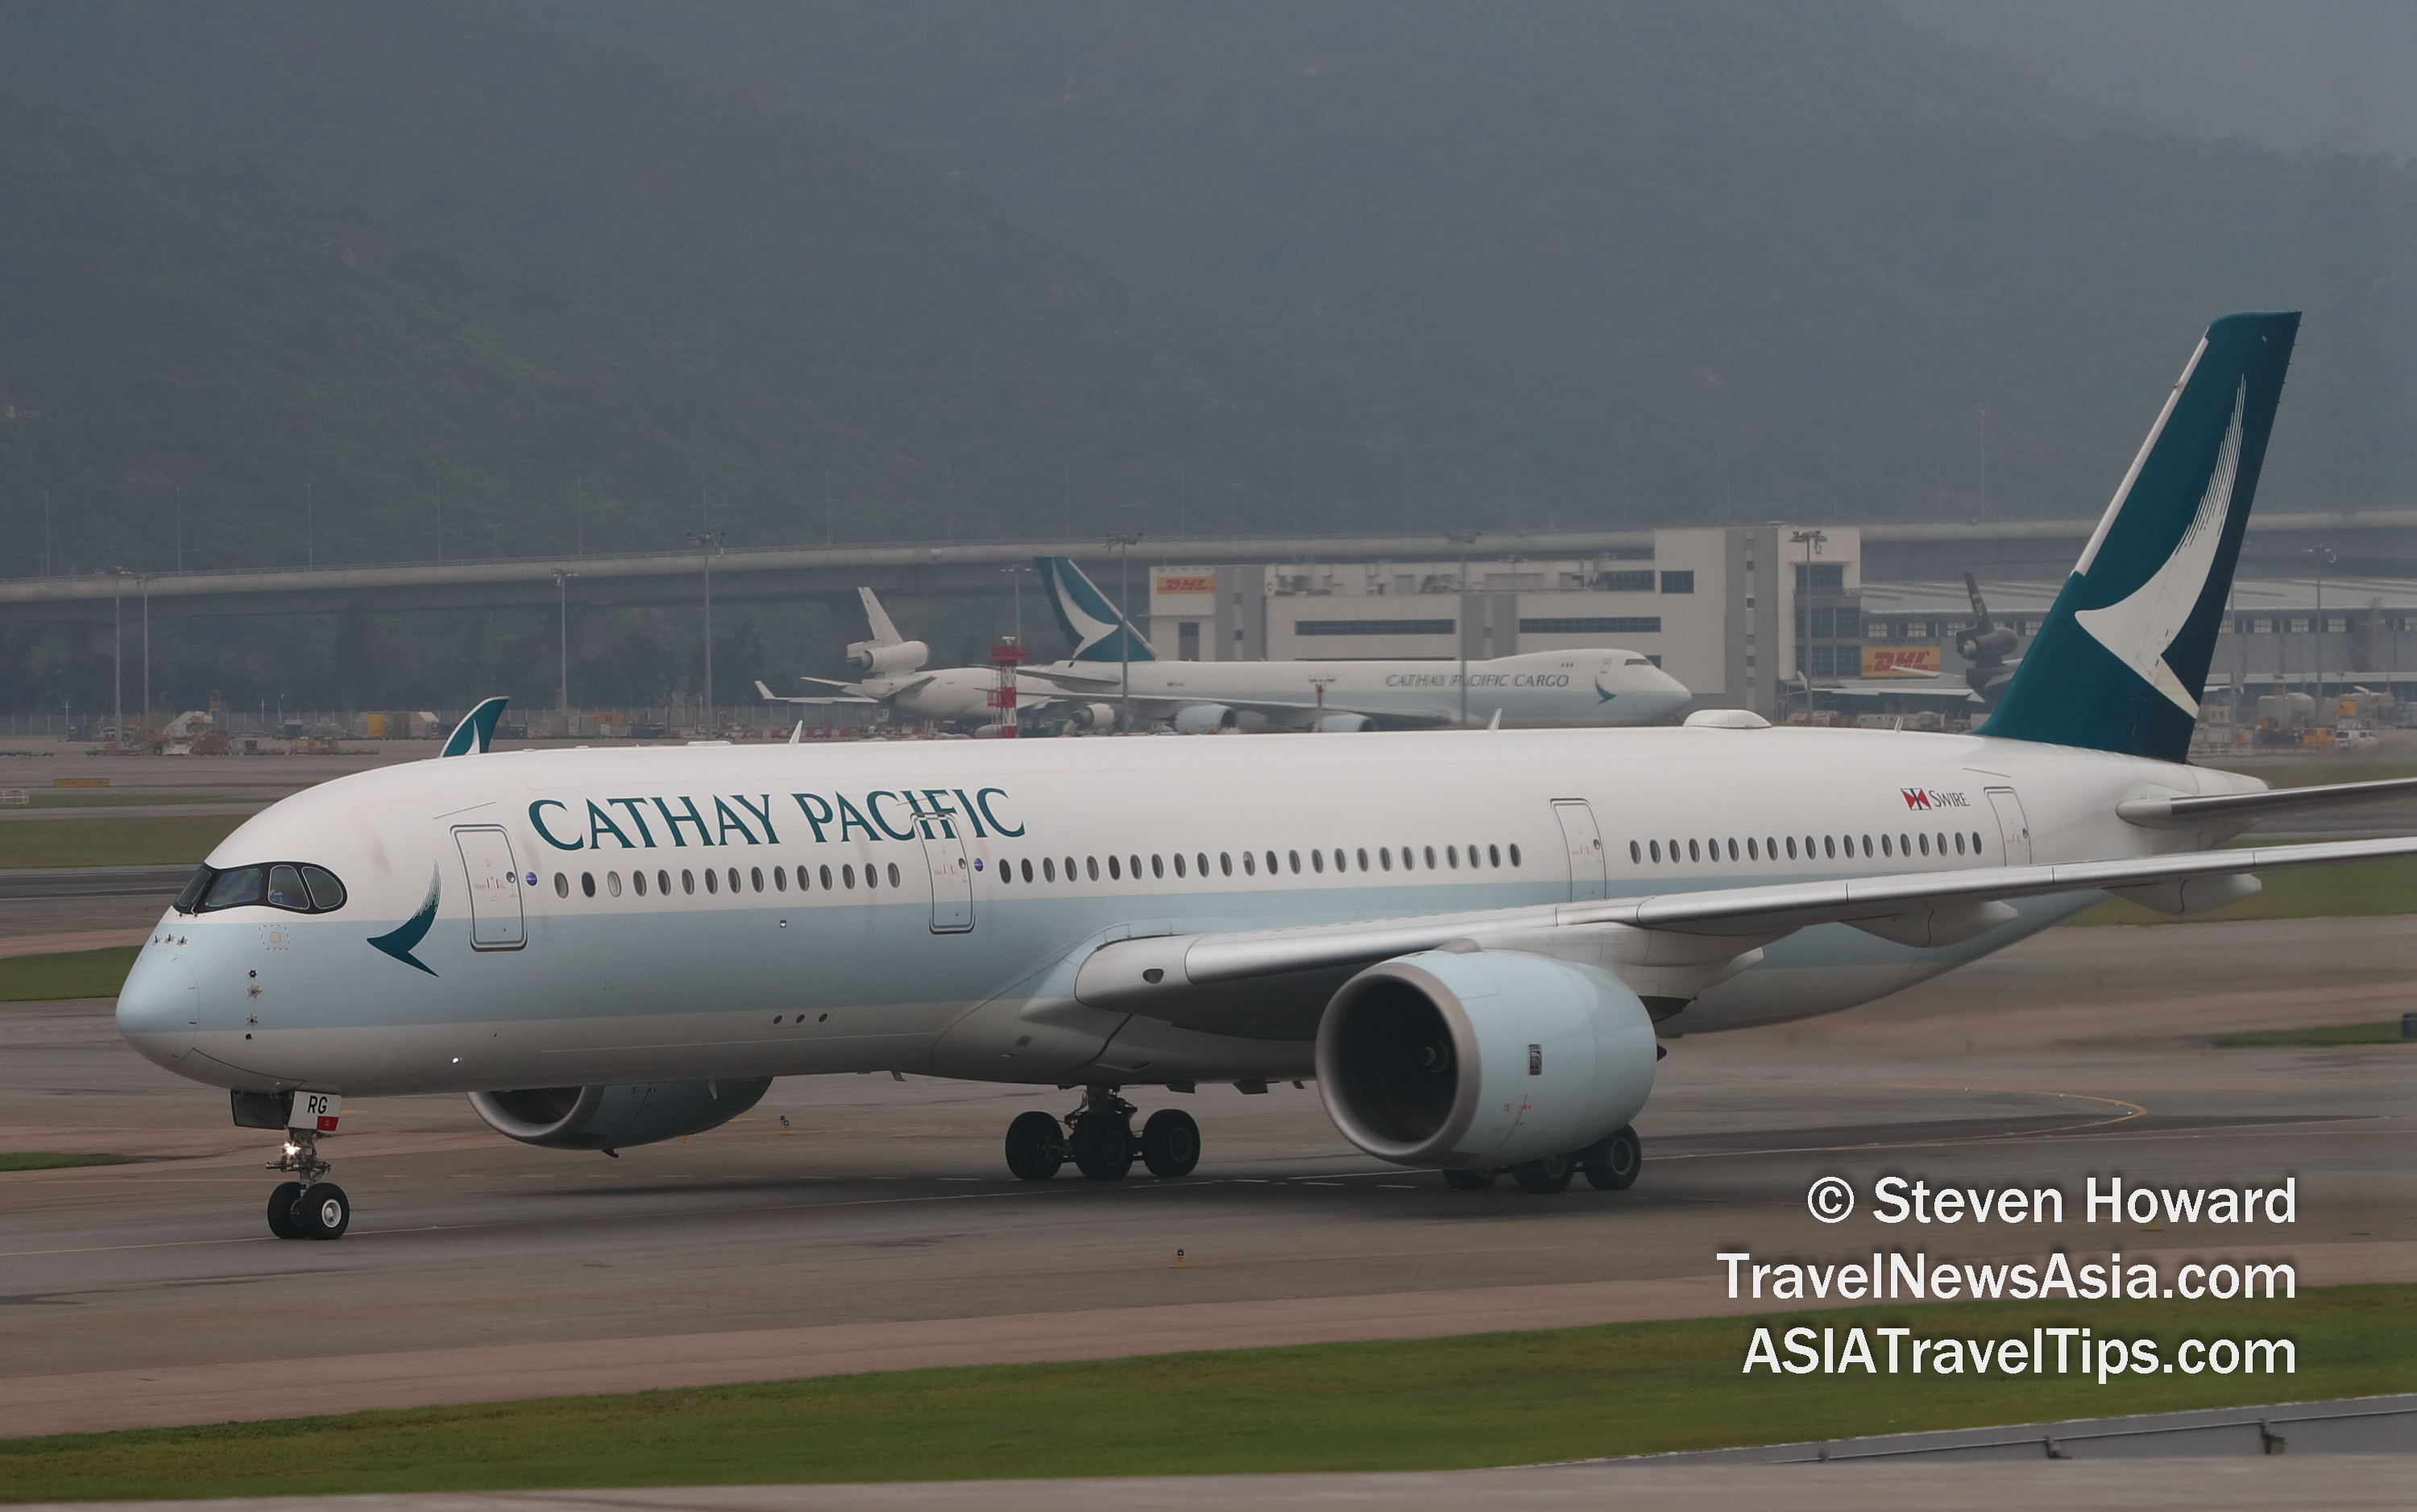 Cathay Pacific Airbus A350 in the foreground with a Cathay Pacific Cargo Boeing 747F in the background. Picture by Steven Howard of TravelNewsAsia.com Click to enlarge.